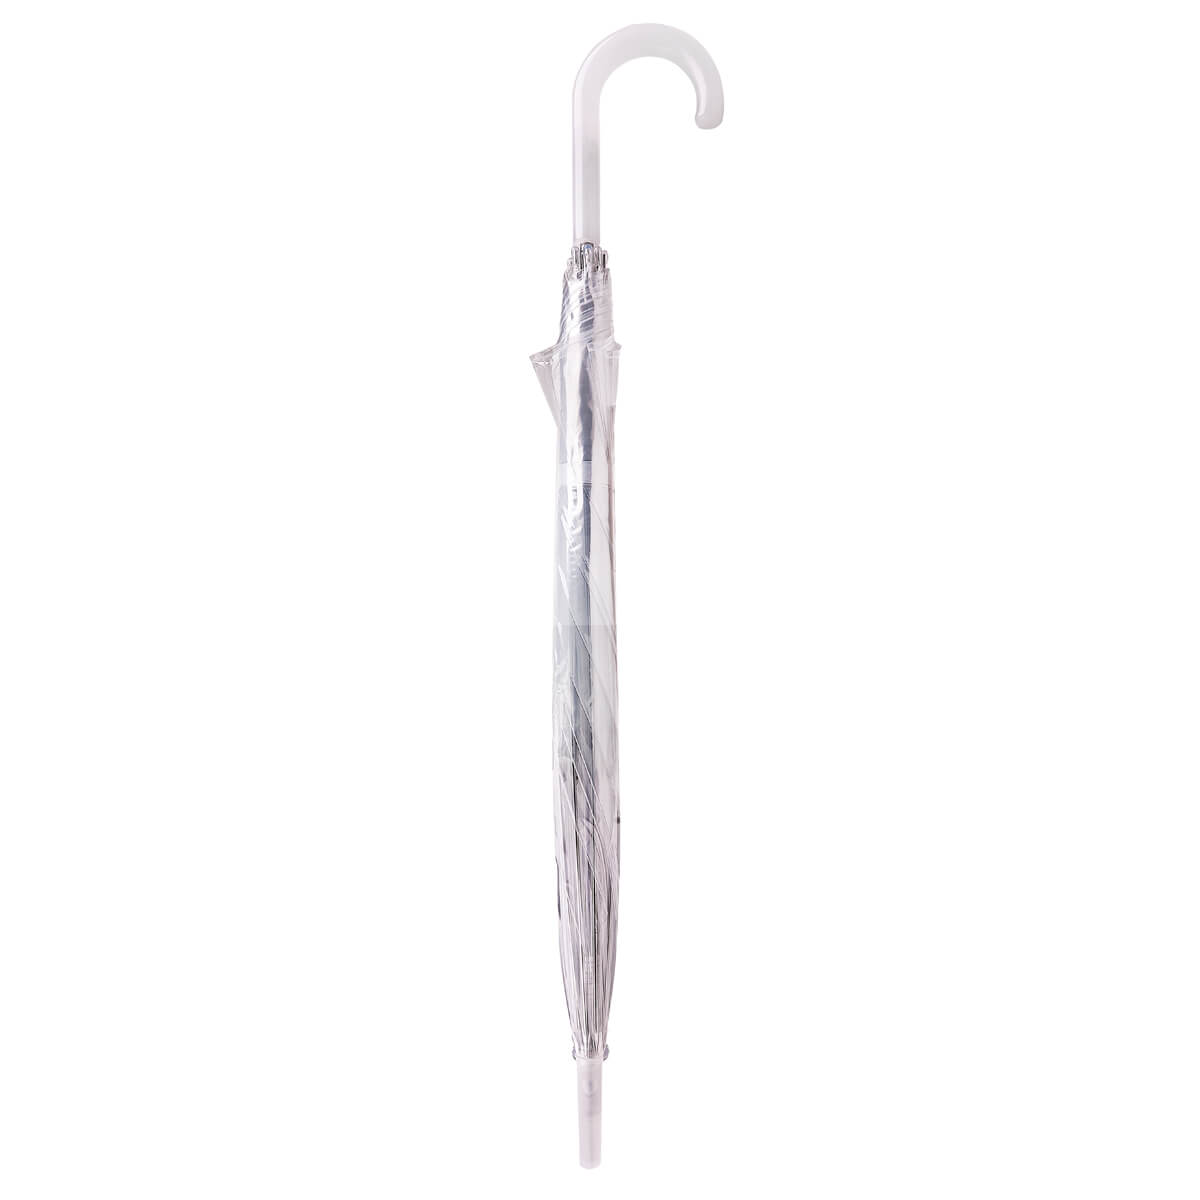 12 Pack of Auto Open Clear Umbrellas (3476-12)